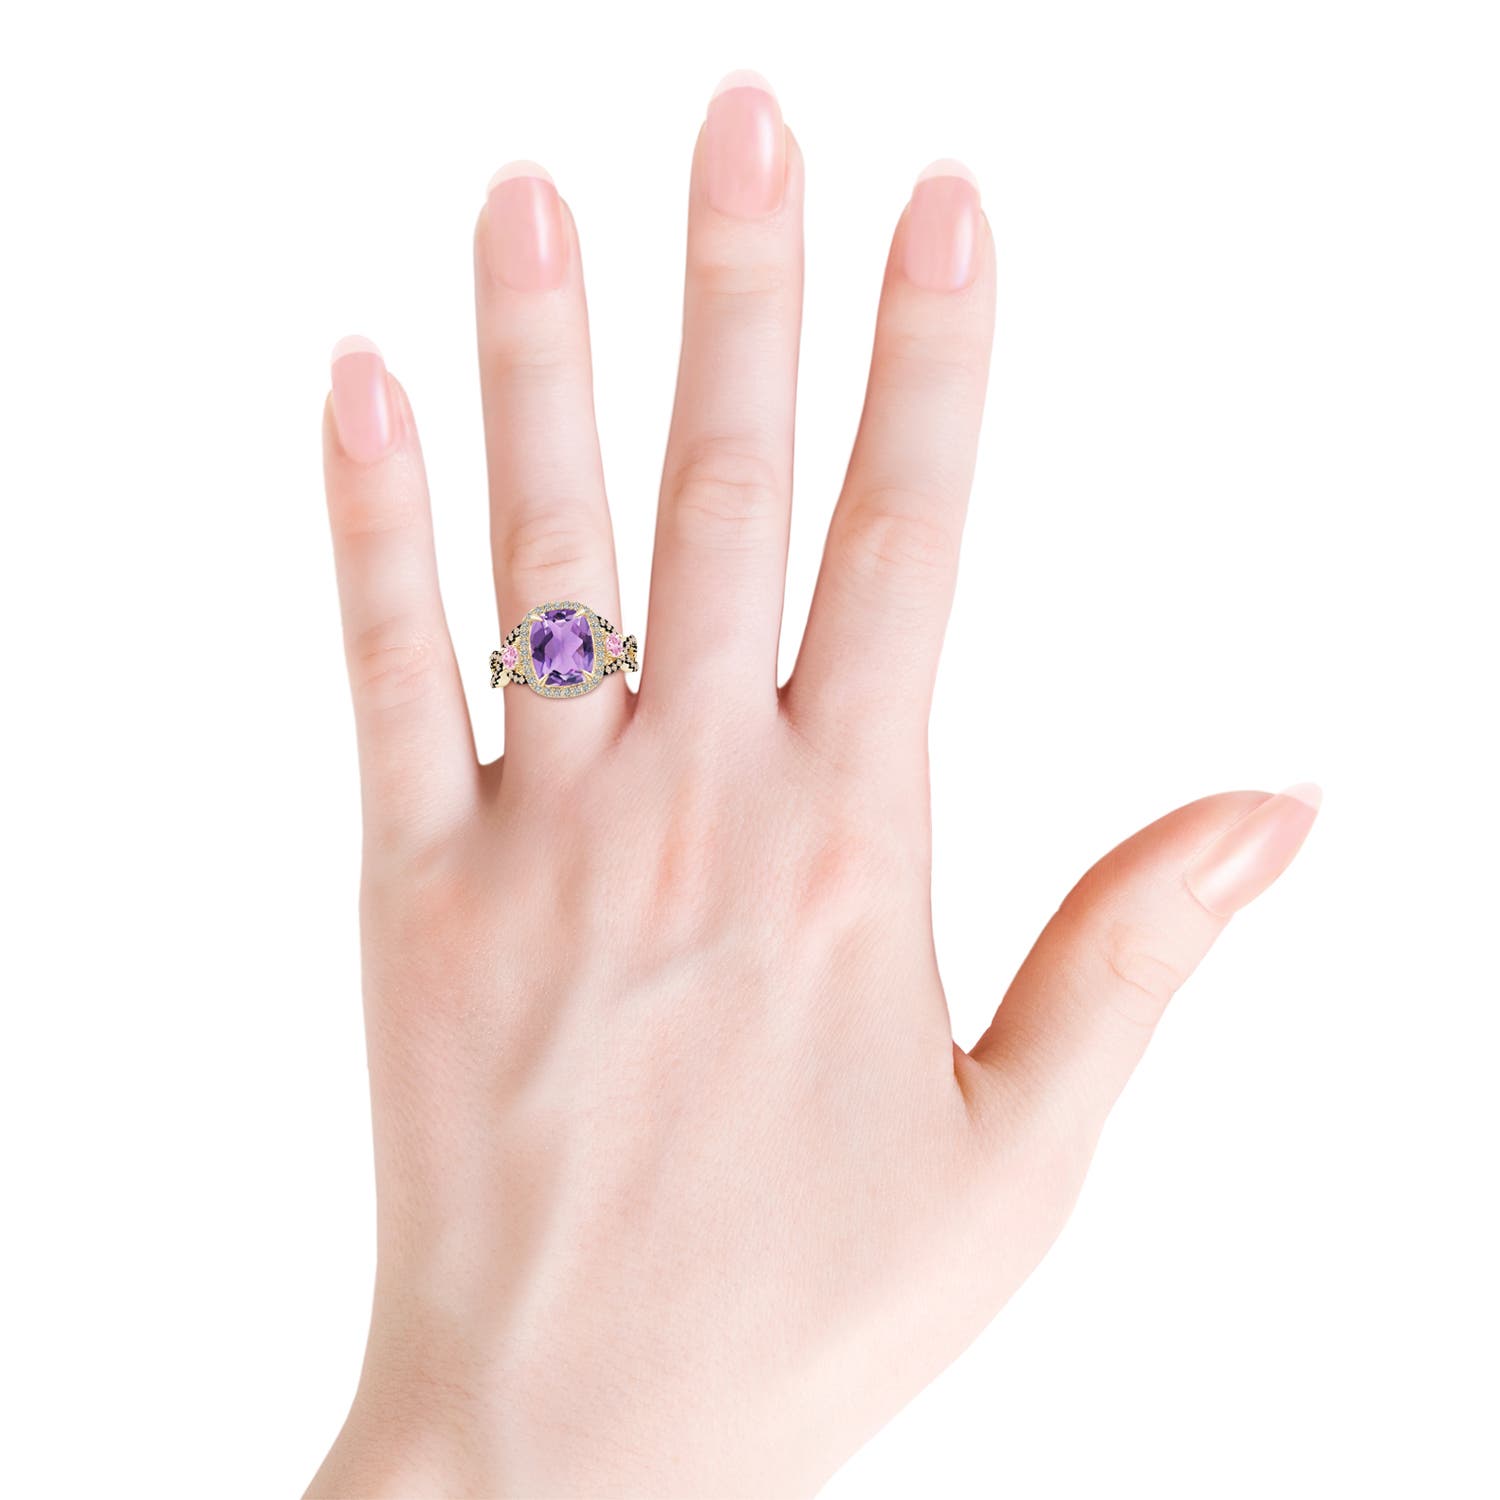 A - Amethyst / 3.39 CT / 14 KT Yellow Gold